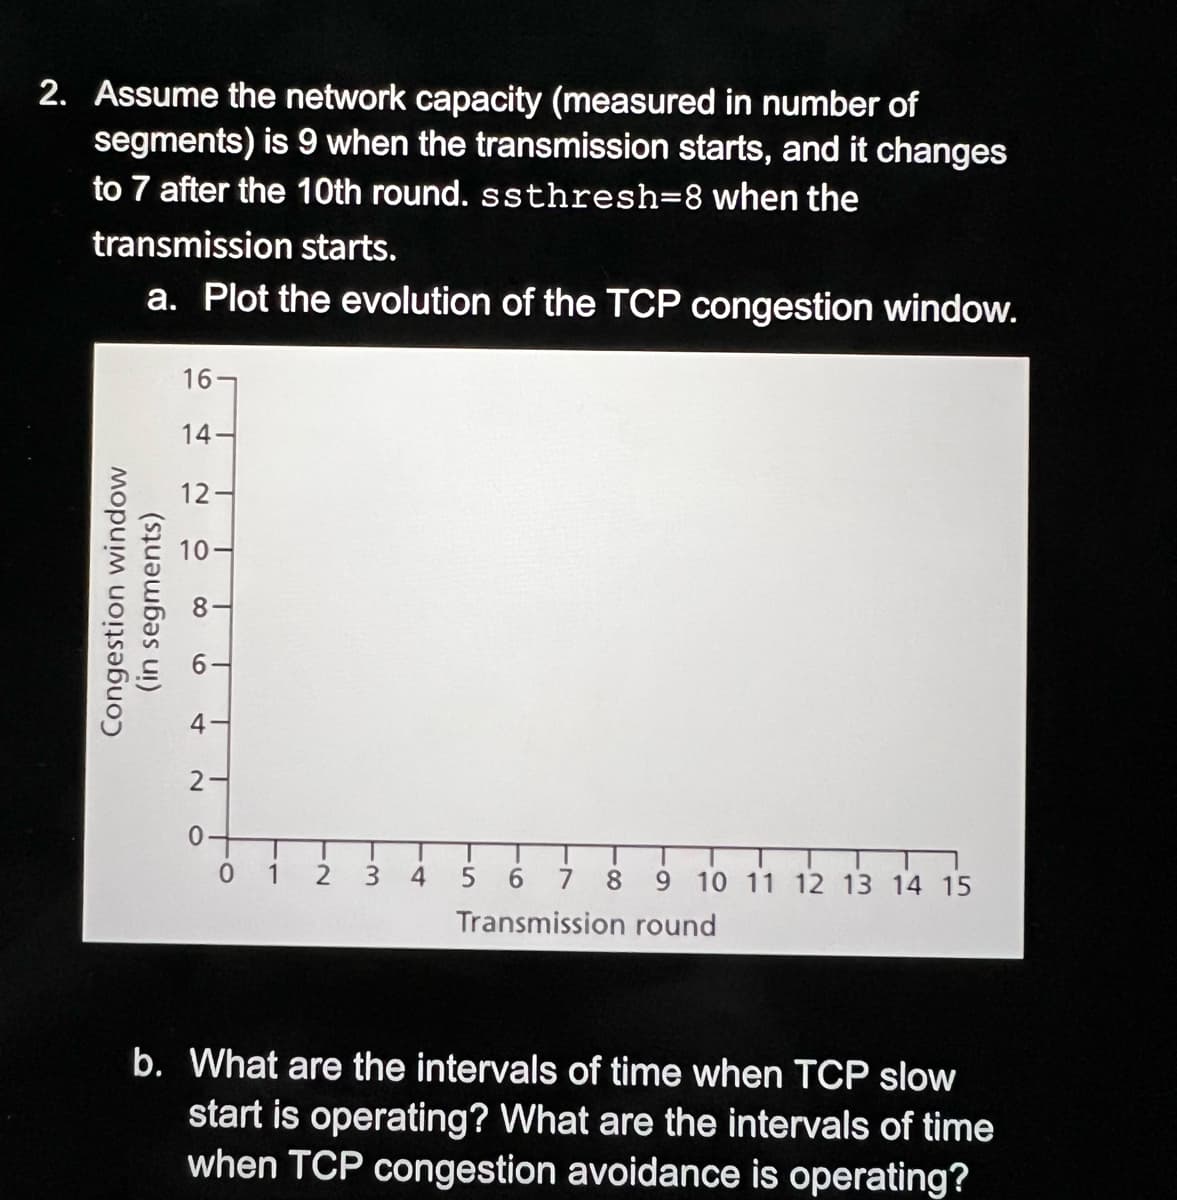 2. Assume the network capacity (measured in number of
segments) is 9 when the transmission starts, and it changes
to 7 after the 10th round. ssthresh-8 when the
transmission starts.
a. Plot the evolution of the TCP congestion window.
Congestion window
(in segments)
16-
14-
12-
10-
8
6
2-
O
0.
0 12 3 4
6 7 8 9 10 11 12 13 14 15
Transmission round
b. What are the intervals of time when TCP slow
start is operating? What are the intervals of time
when TCP congestion avoidance is operating?